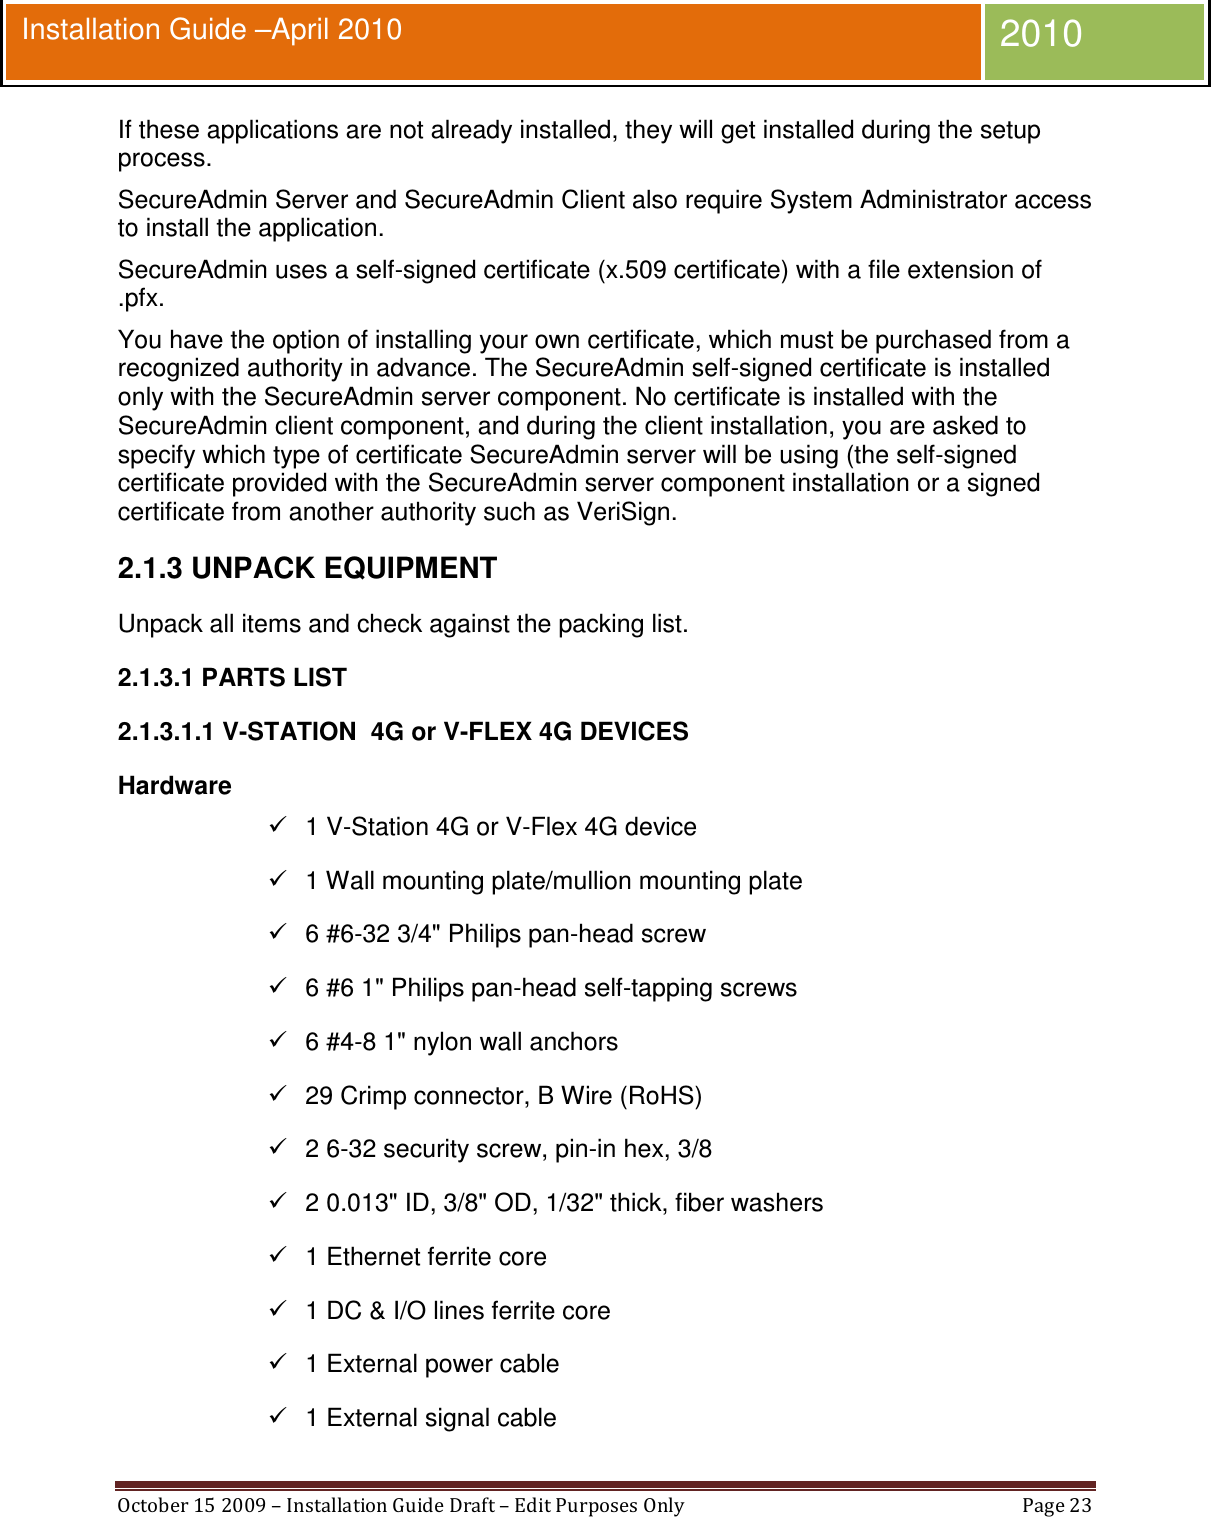  October 15 2009 – Installation Guide Draft – Edit Purposes Only  Page 23  Installation Guide –April 2010 2010 If these applications are not already installed, they will get installed during the setup process. SecureAdmin Server and SecureAdmin Client also require System Administrator access to install the application. SecureAdmin uses a self-signed certificate (x.509 certificate) with a file extension of .pfx. You have the option of installing your own certificate, which must be purchased from a recognized authority in advance. The SecureAdmin self-signed certificate is installed only with the SecureAdmin server component. No certificate is installed with the SecureAdmin client component, and during the client installation, you are asked to specify which type of certificate SecureAdmin server will be using (the self-signed certificate provided with the SecureAdmin server component installation or a signed certificate from another authority such as VeriSign. 2.1.3 UNPACK EQUIPMENT Unpack all items and check against the packing list.  2.1.3.1 PARTS LIST 2.1.3.1.1 V-STATION  4G or V-FLEX 4G DEVICES Hardware   1 V-Station 4G or V-Flex 4G device   1 Wall mounting plate/mullion mounting plate   6 #6-32 3/4&quot; Philips pan-head screw   6 #6 1&quot; Philips pan-head self-tapping screws   6 #4-8 1&quot; nylon wall anchors   29 Crimp connector, B Wire (RoHS)   2 6-32 security screw, pin-in hex, 3/8   2 0.013&quot; ID, 3/8&quot; OD, 1/32&quot; thick, fiber washers   1 Ethernet ferrite core   1 DC &amp; I/O lines ferrite core   1 External power cable   1 External signal cable 